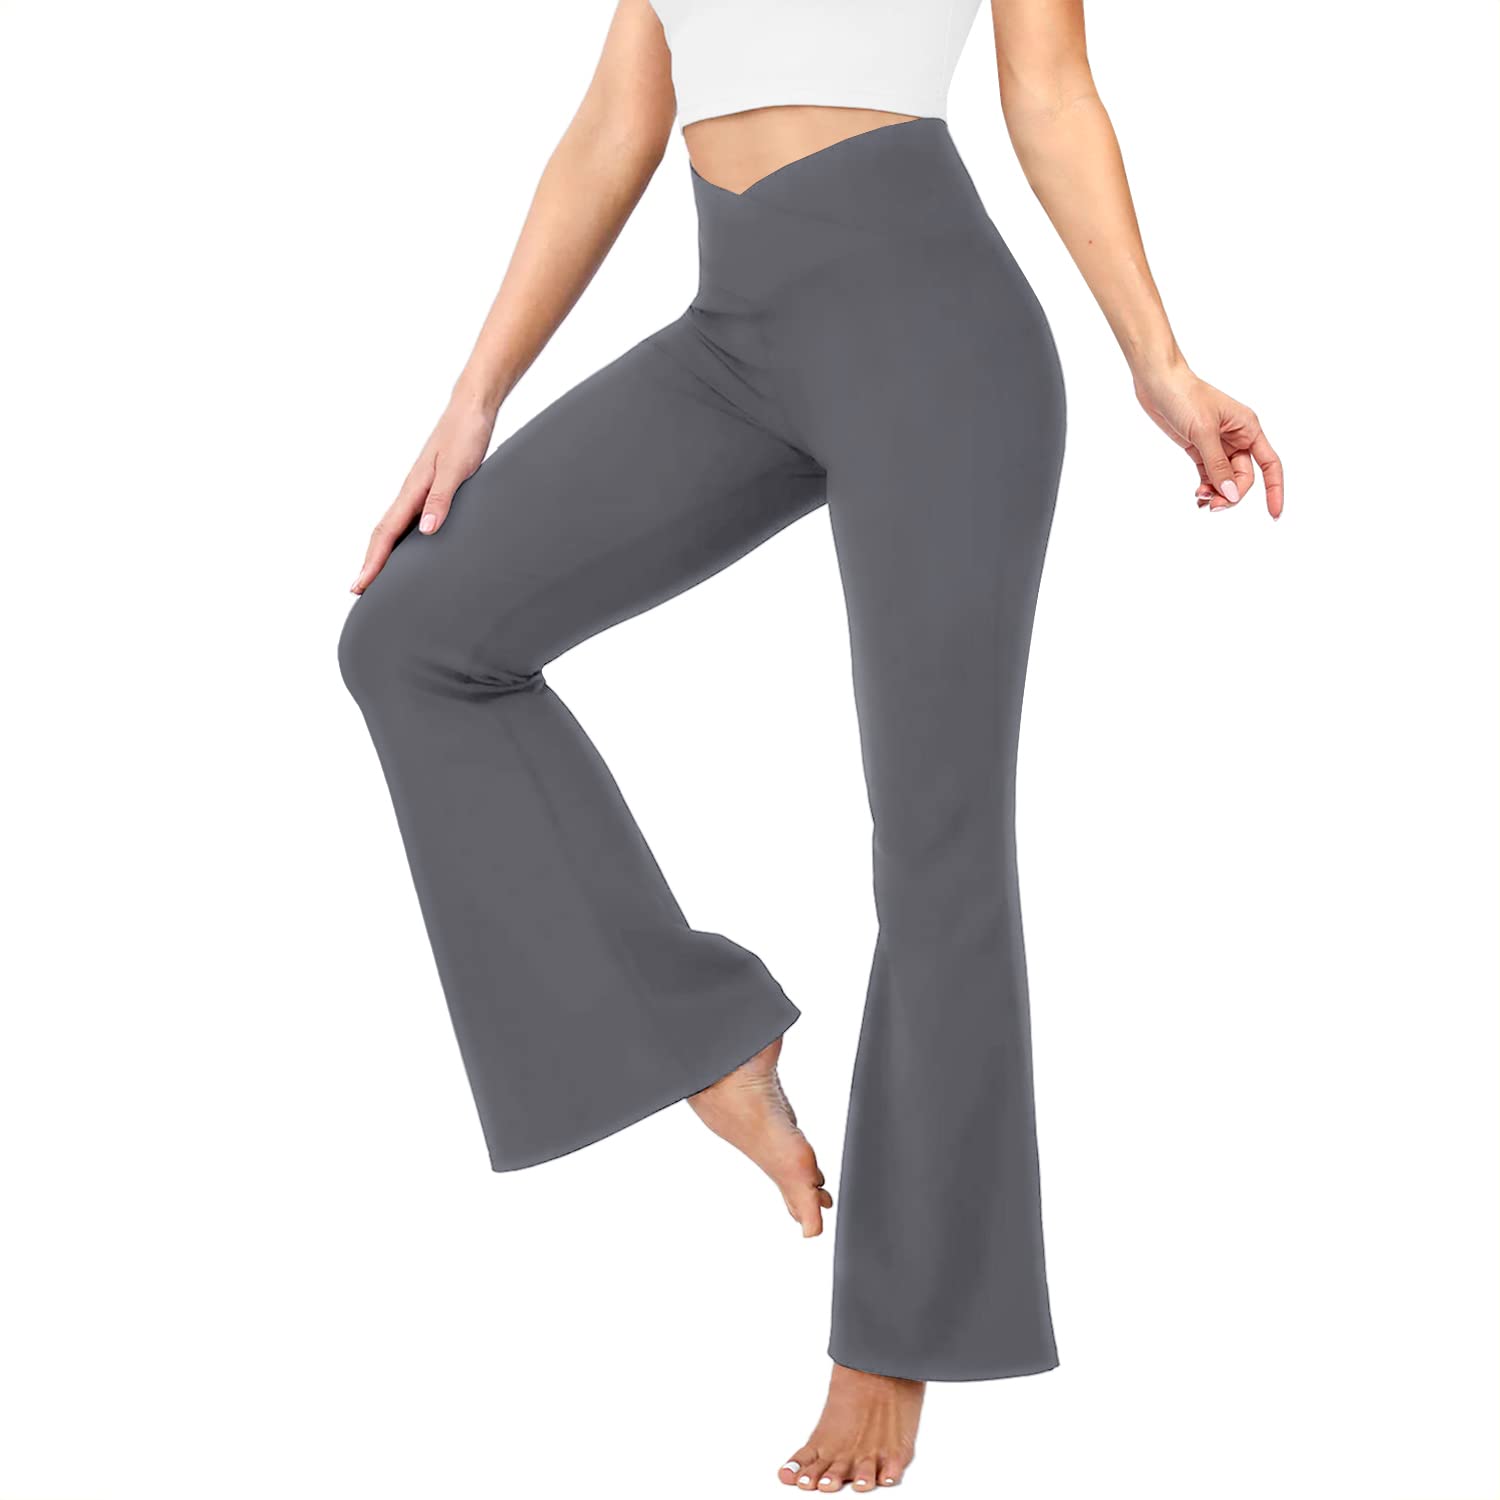 YOLIX Black Flare Yoga Pants for Women, Crossover Bootcut High